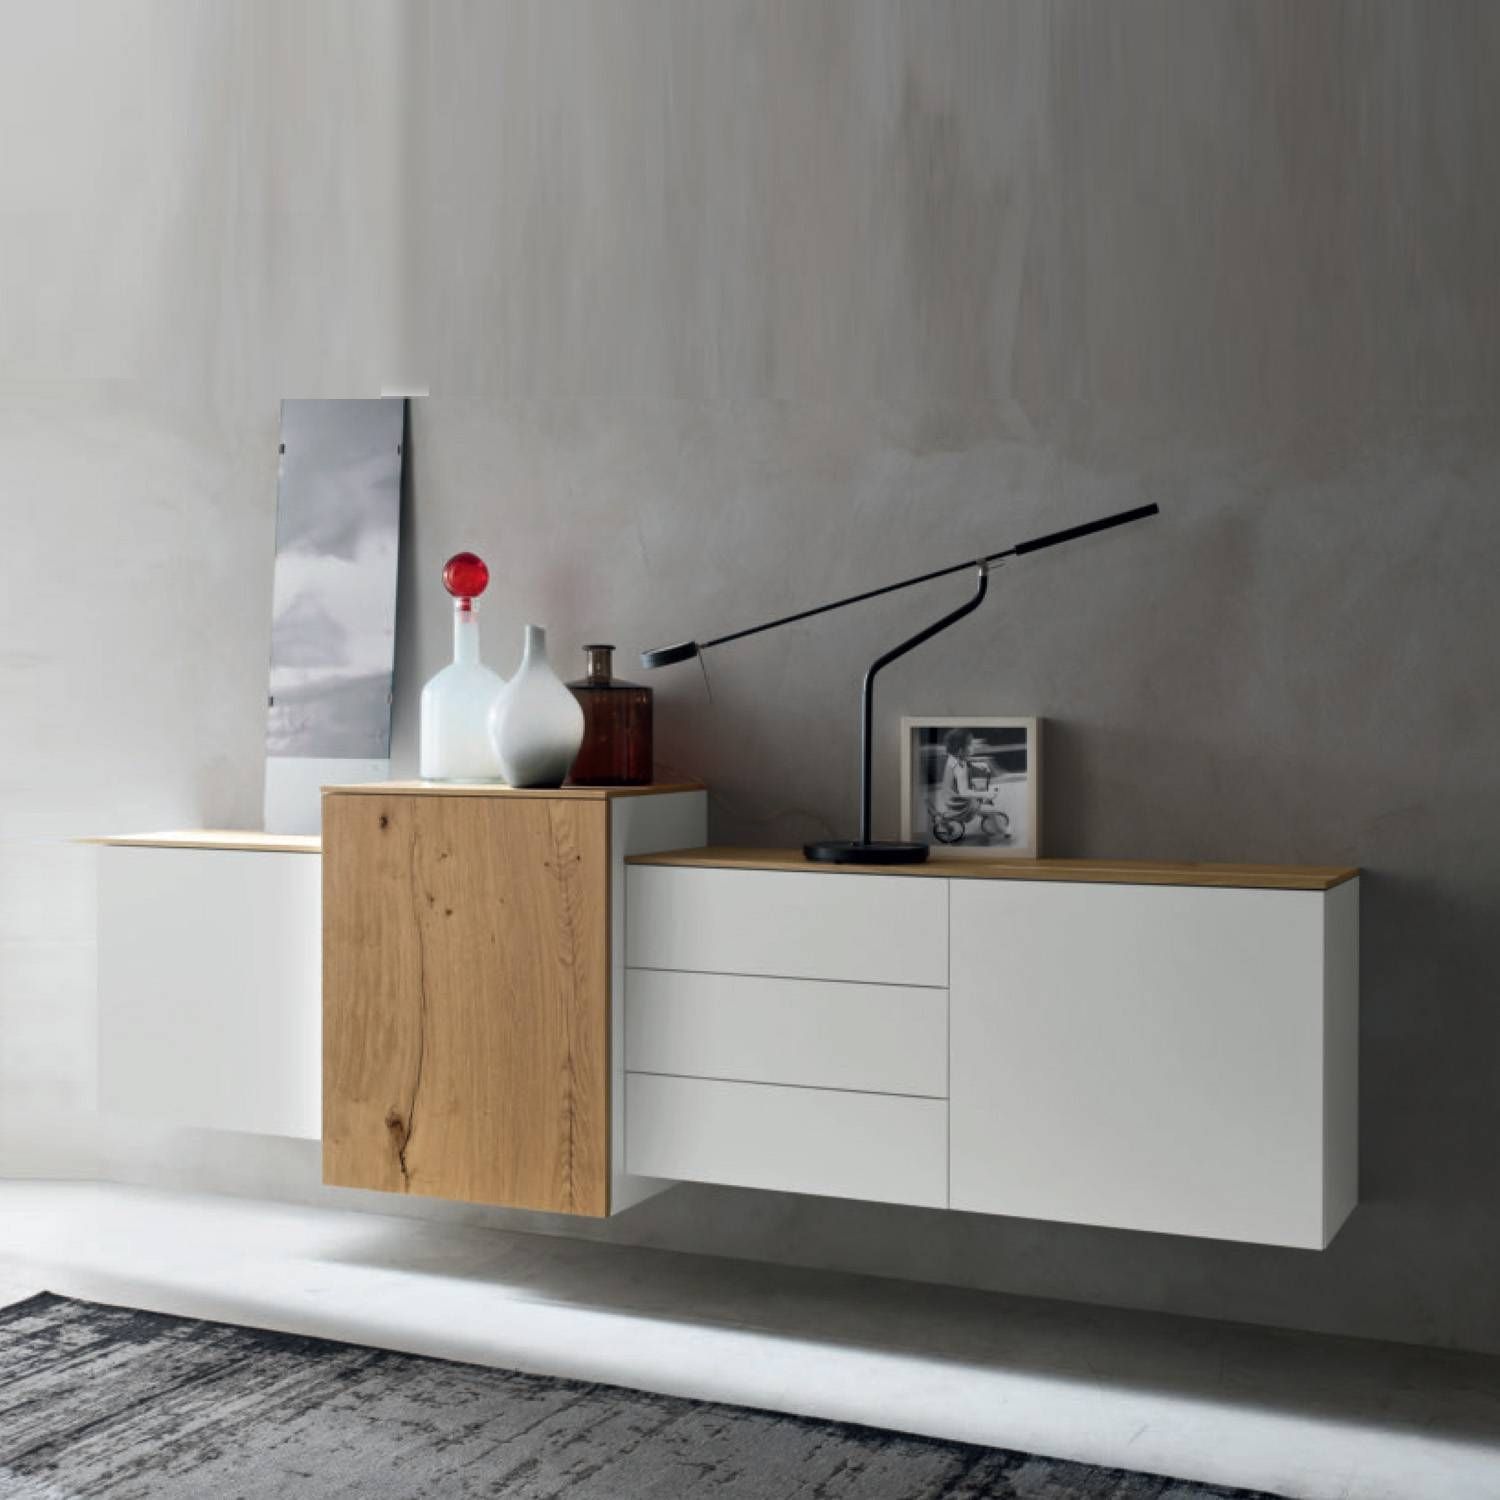 The Latest Furniture Fashion Trendsorme My Italian Living Ltd Intended For White Contemporary Sideboard (View 12 of 20)